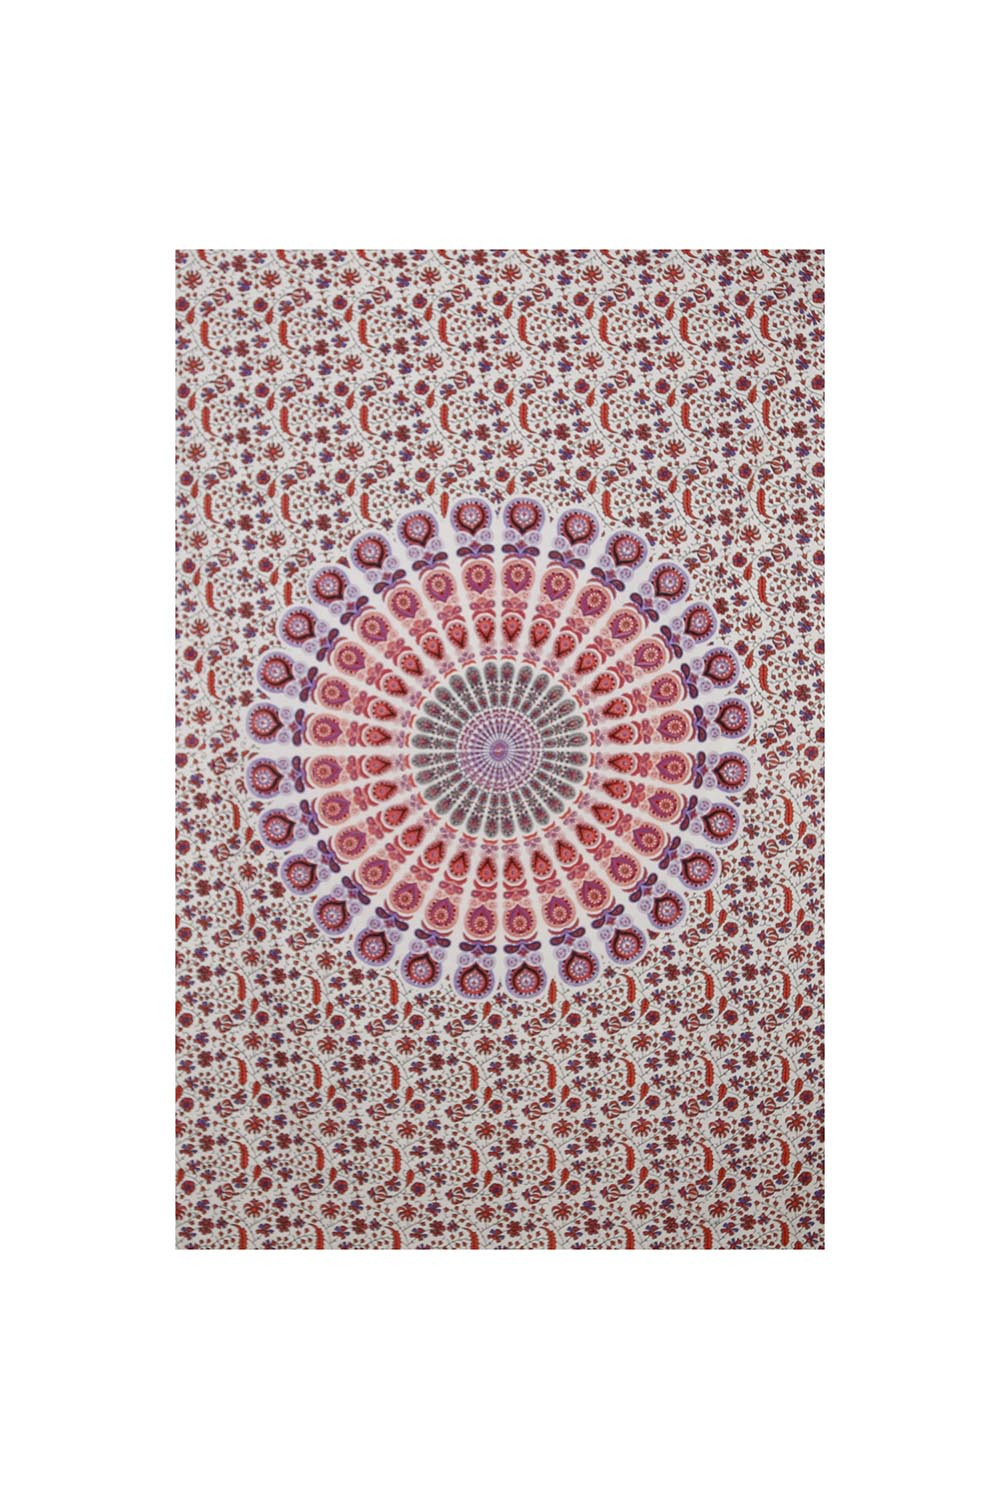 Zest For Life Pink/Purple/Red Plume Mini Tapestry 30x45" 